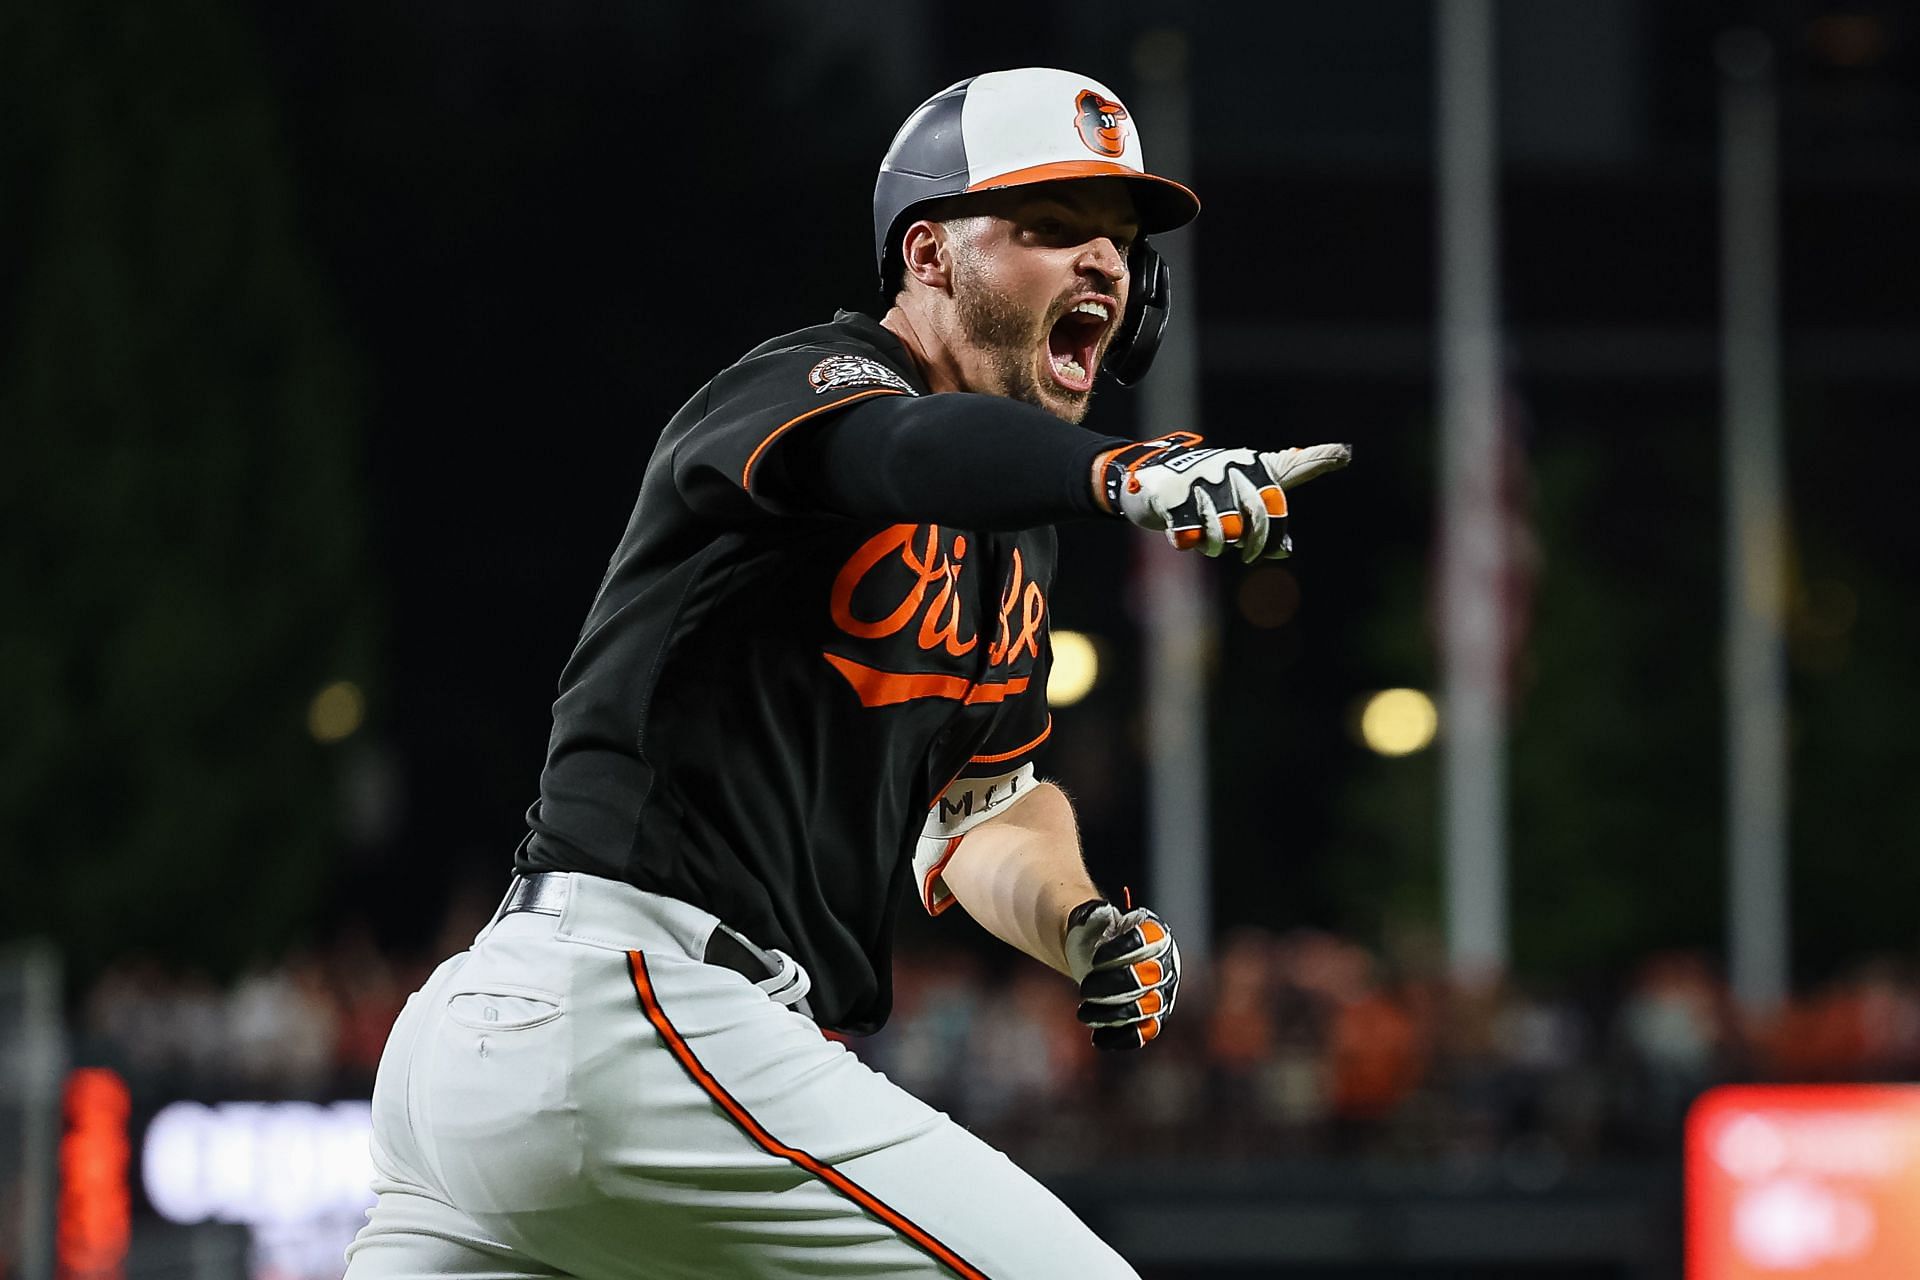 The Trey Mancini situation has us worried - Camden Chat